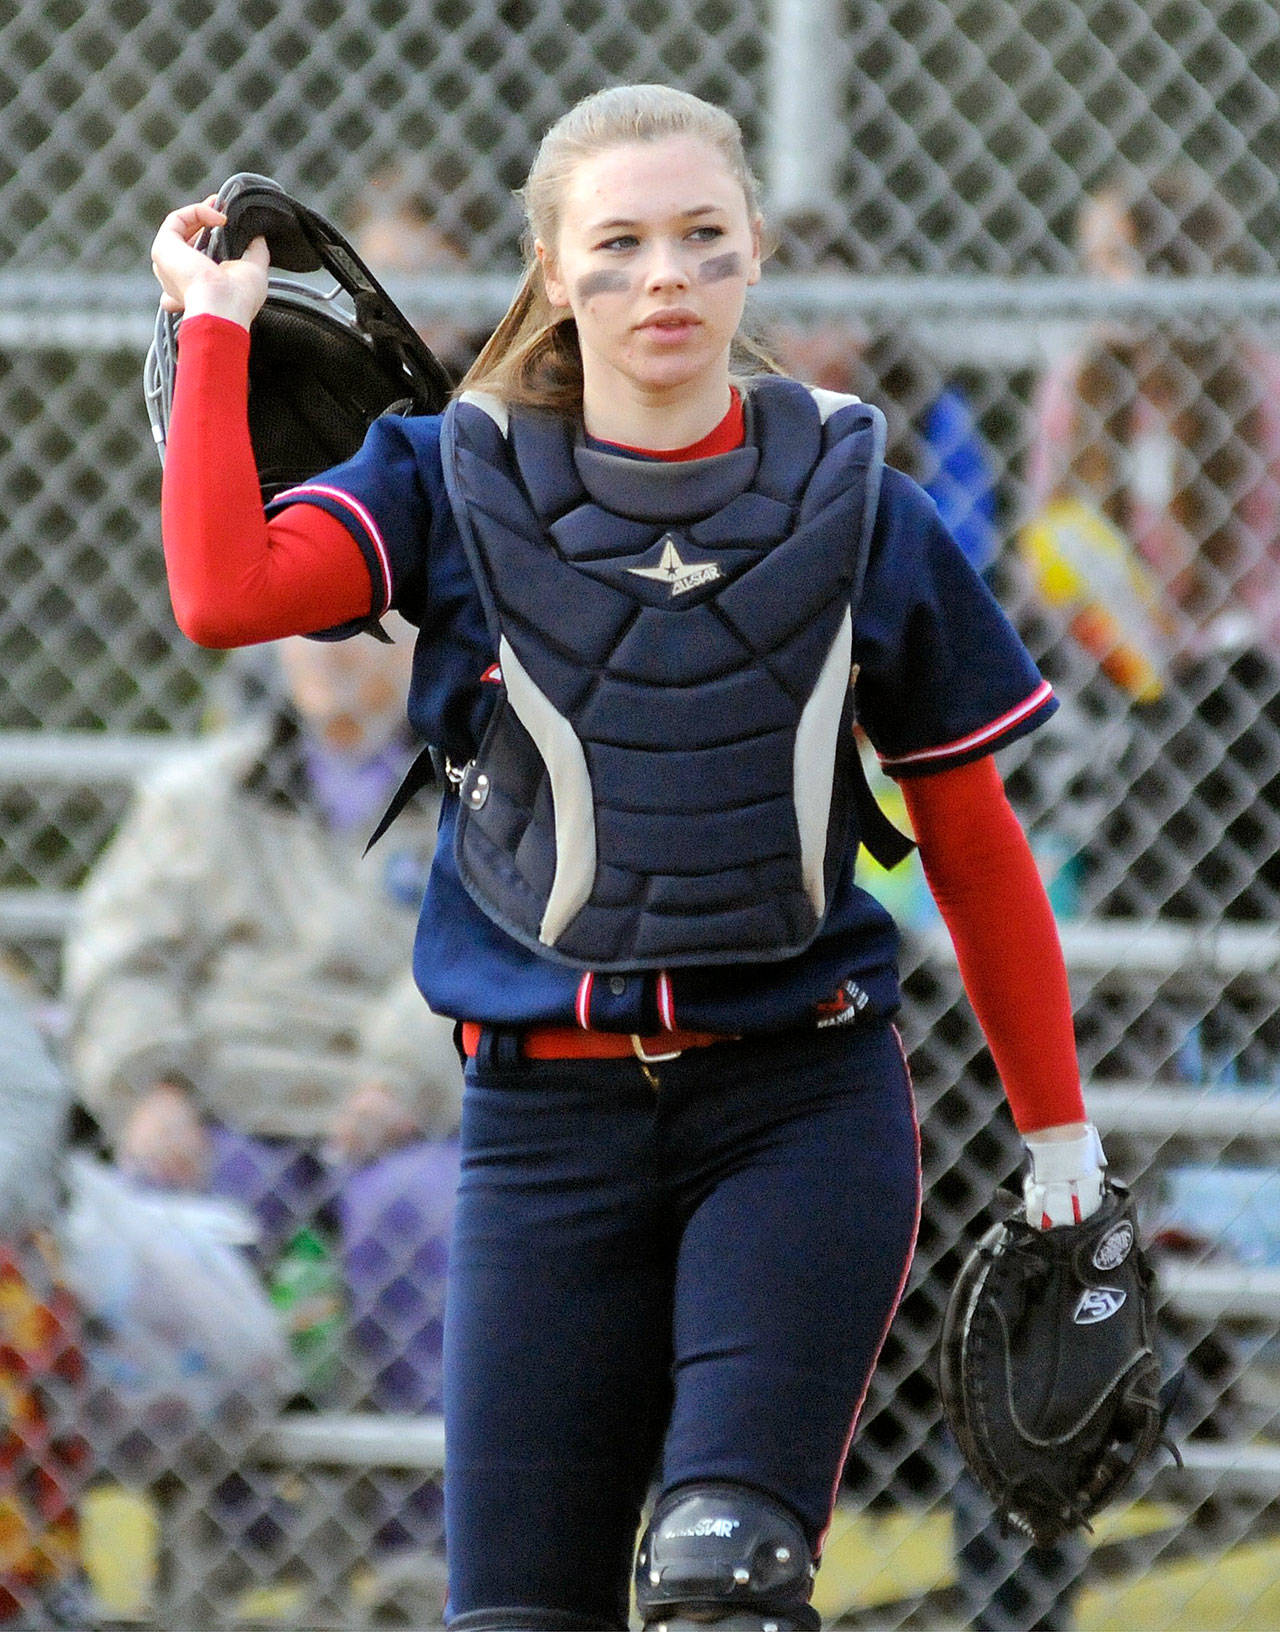 PWV catcher Grace Hodel, seen here in a game against Ocosta earlier this season, was one of five Titans named to the 2B All-State First Team on Tuesday. (Ryan Sparks | Grays Harbor News Group)